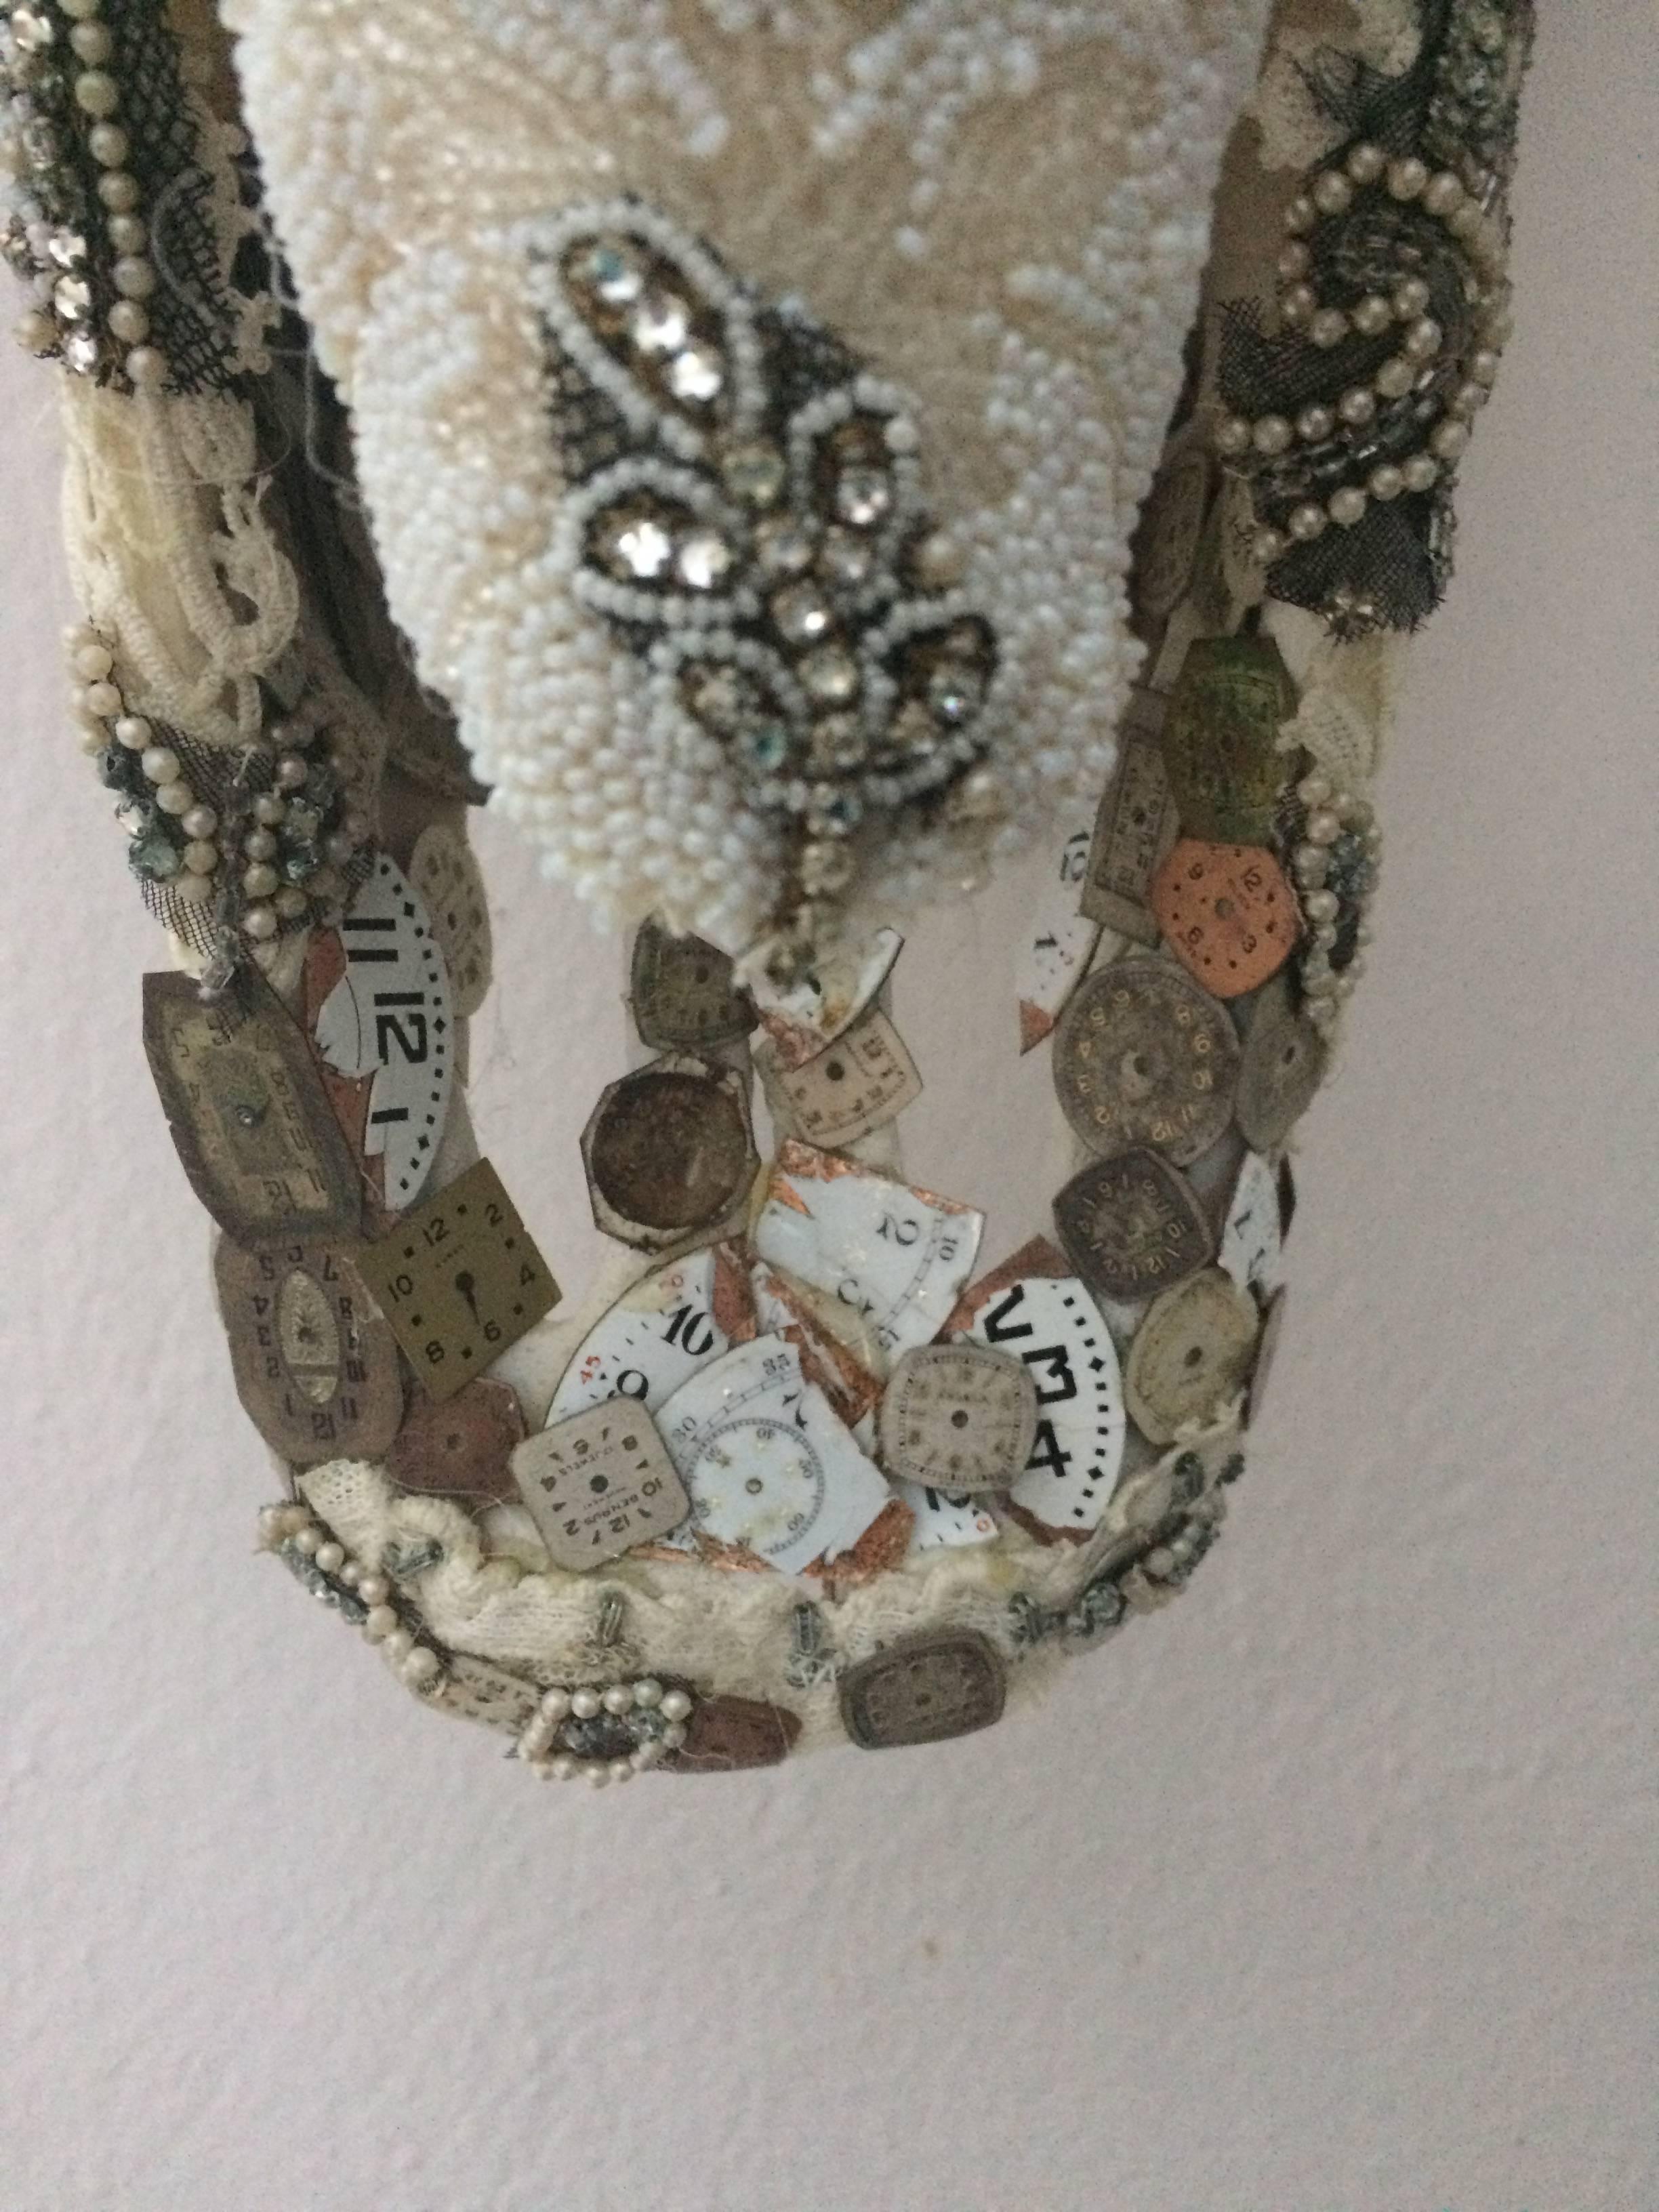 Contemporary Intricate and Thoughtful Large Mixed Media Skull Sculpture For Sale